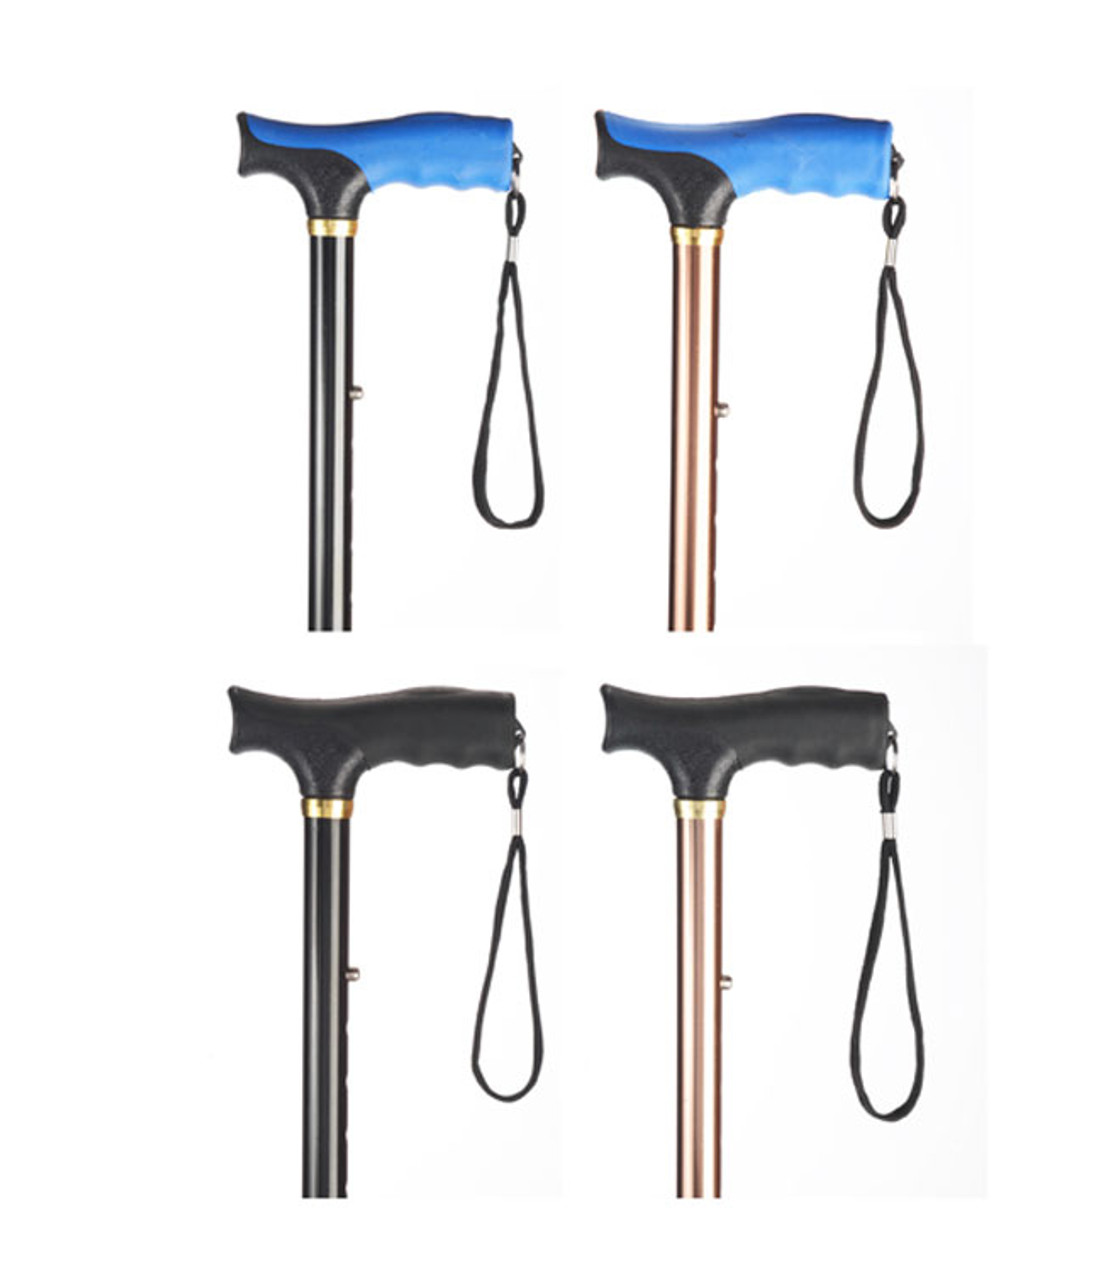 MOBB Health Care MHFCBUBL Folding Canes Black w/Blue handle 81cm - 91cm (MOBB Health Care MHFCBUBL)